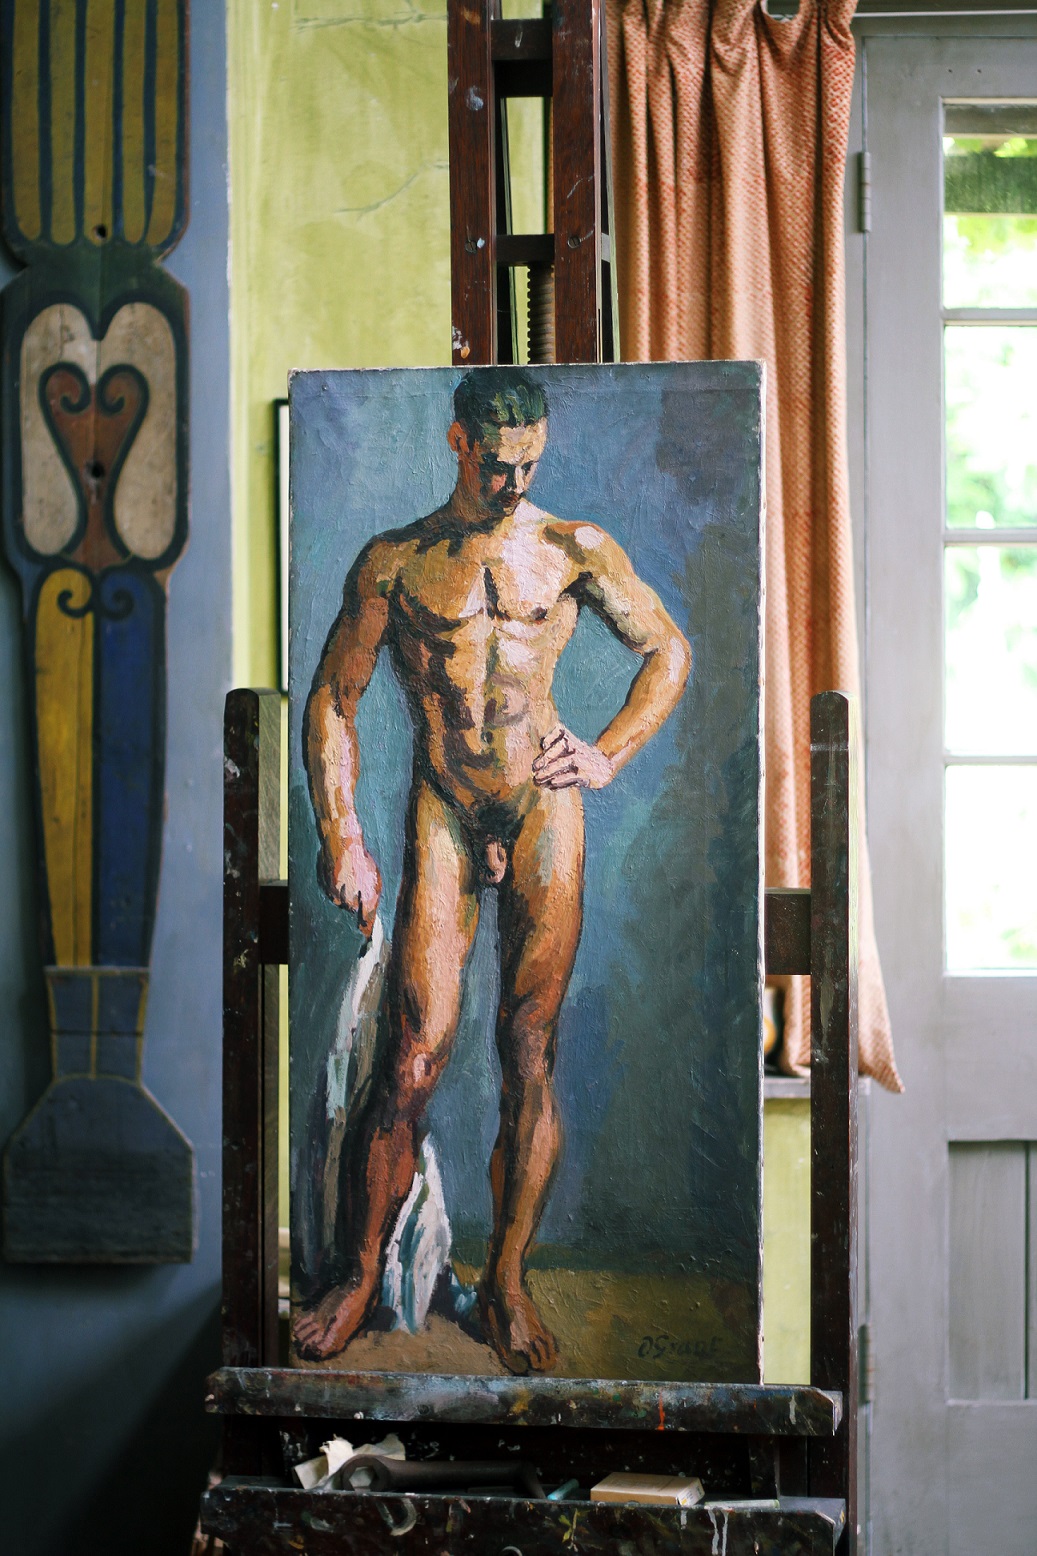 Duncan Grants painting of a standing male nude rests on an easel in the studio at Charleston. You can see a curtain and a door in the background on the right, and a decorative work on the wall in the background on the left.